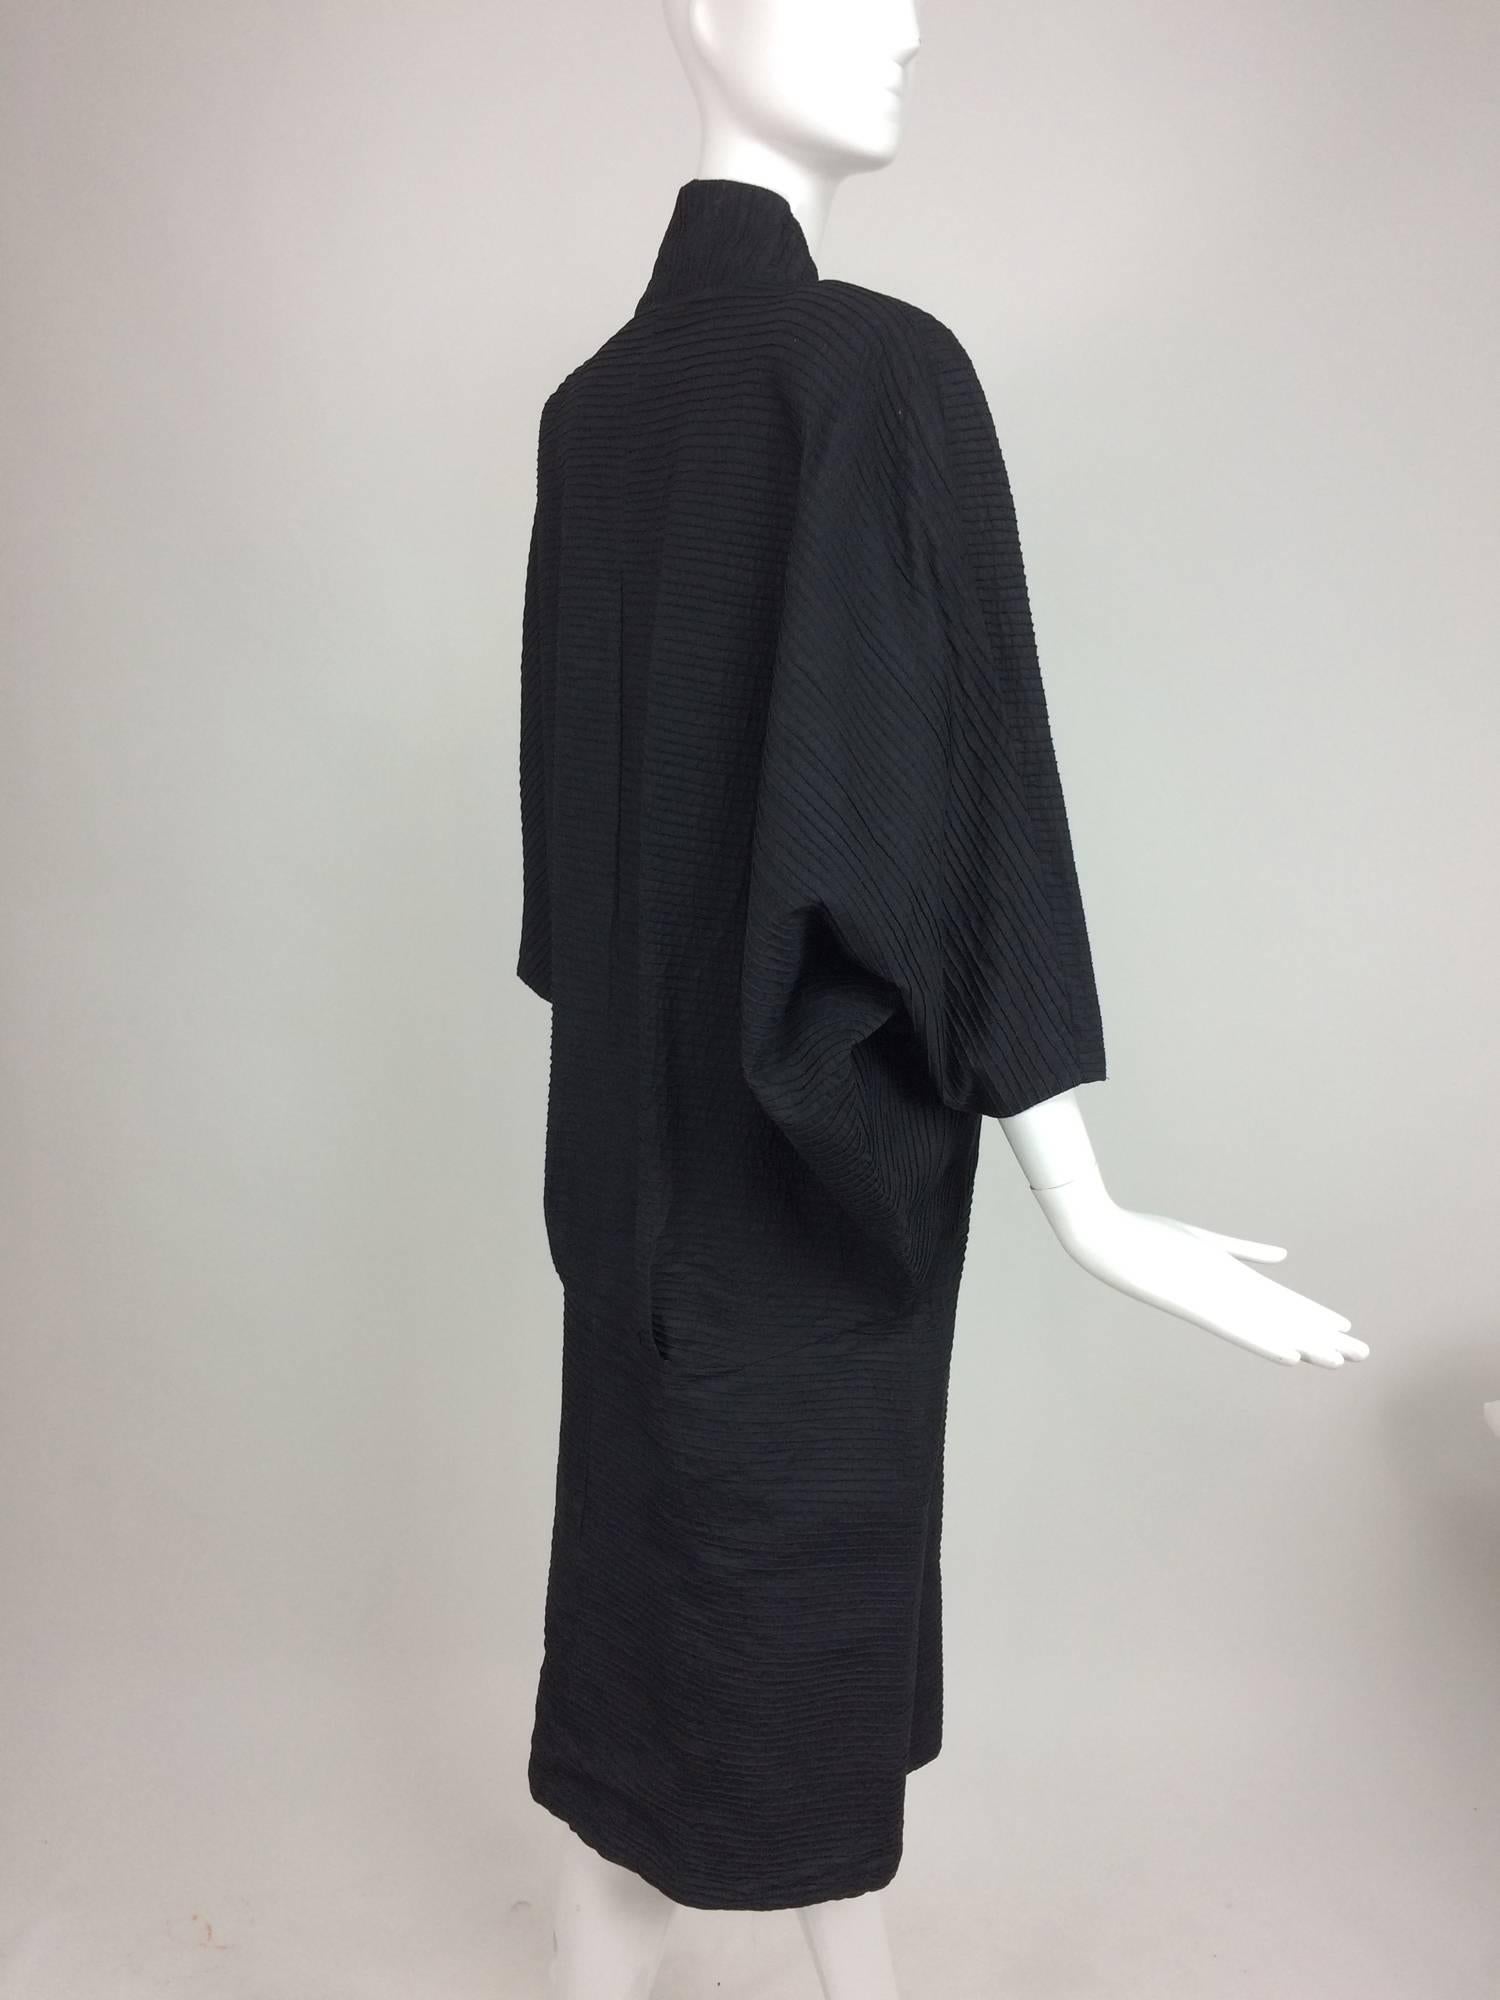 Twins Armoire Boutique Black pin tucked cotton bat wing coat 1980s In Excellent Condition In West Palm Beach, FL